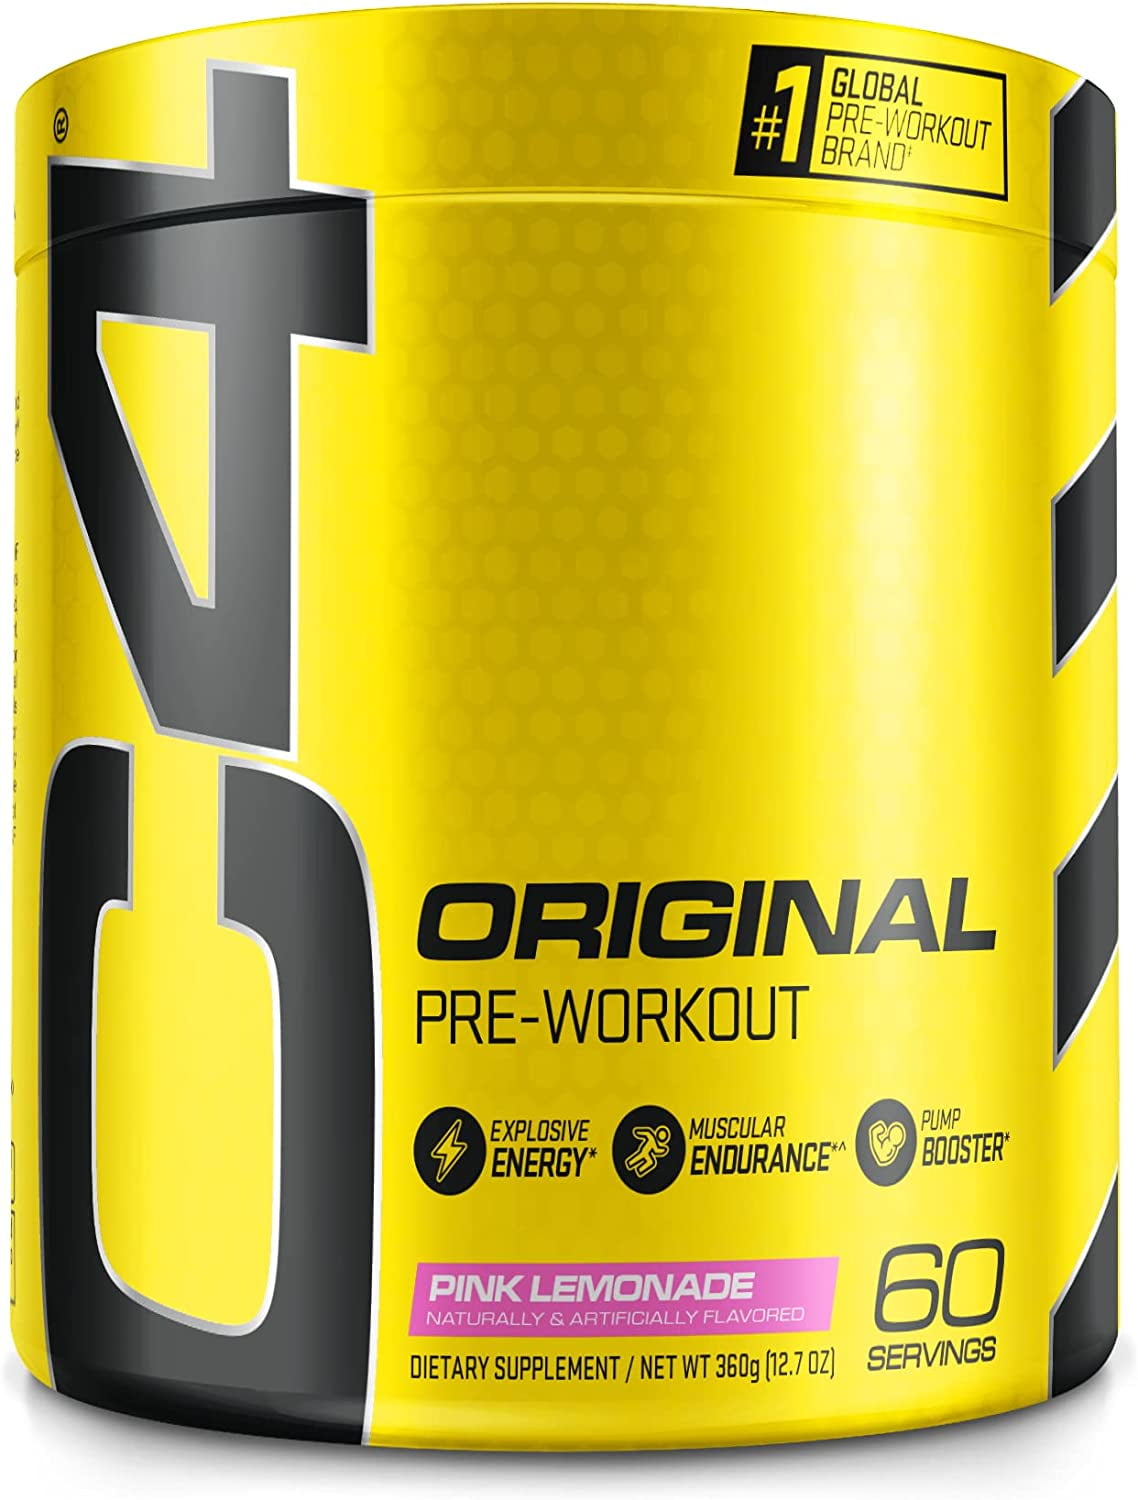 The Best Pre-Workout Powder To Get The Most Out Of The Gym – Novex